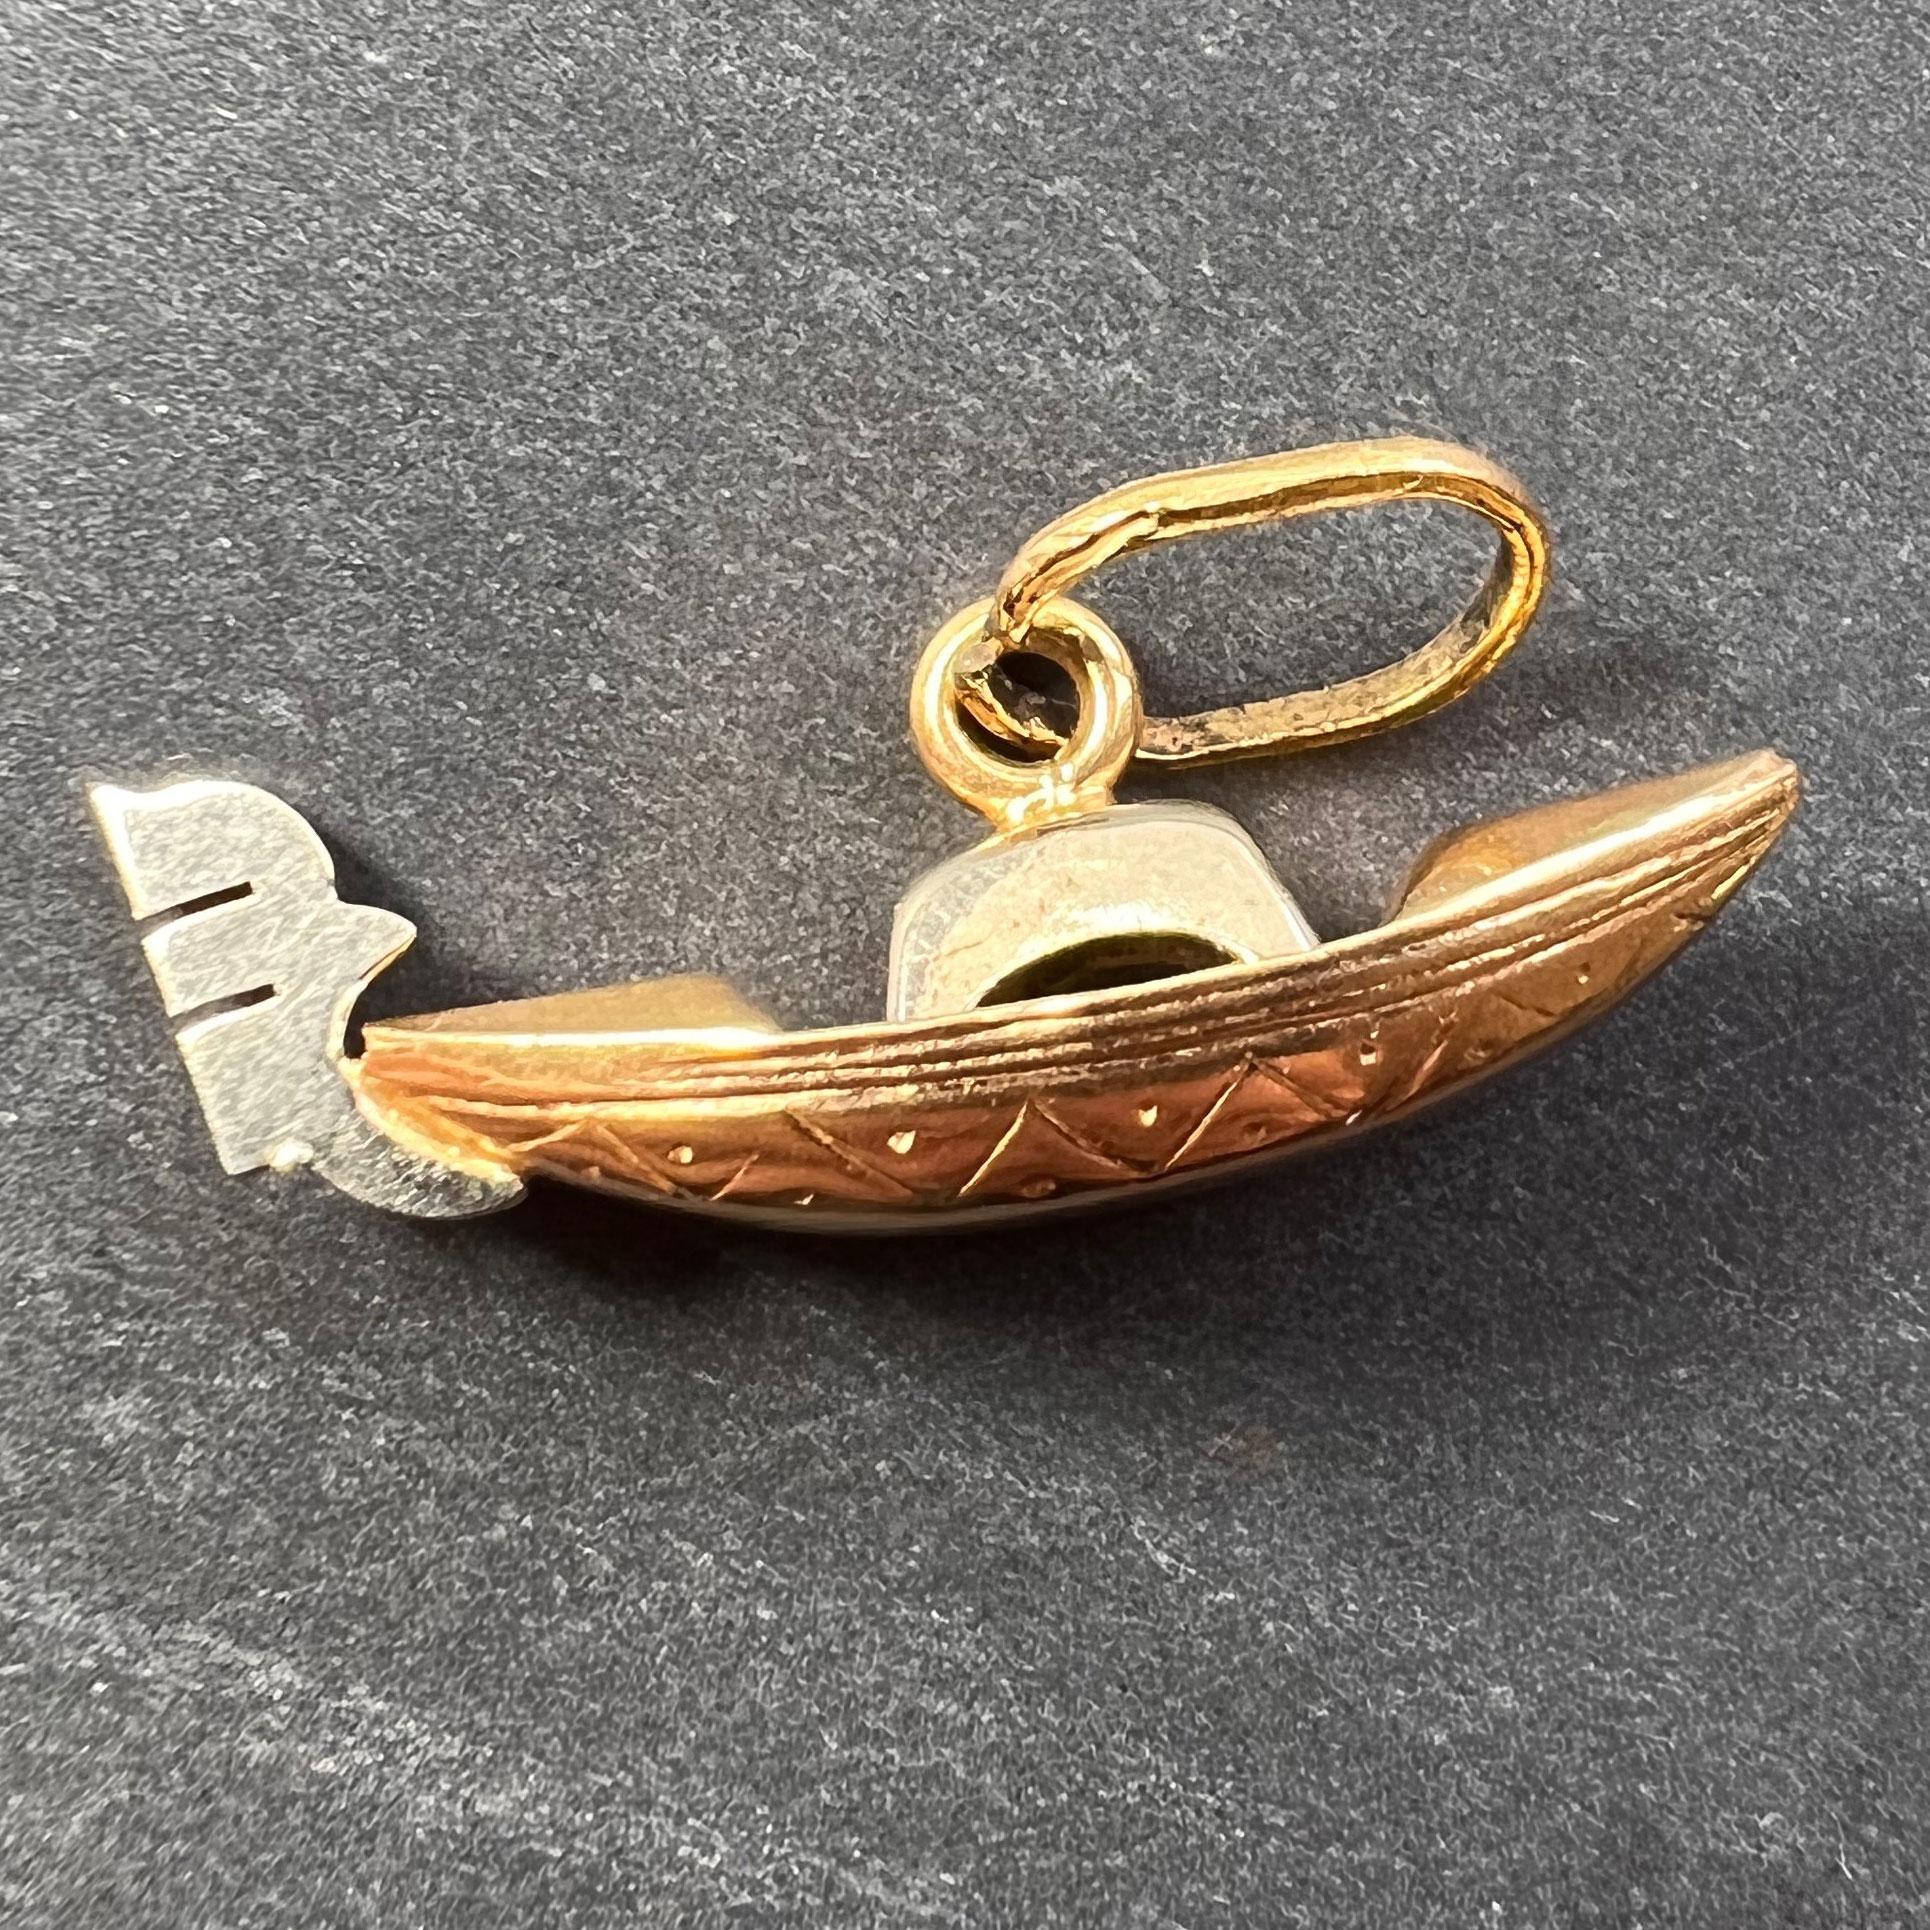 An 18 karat (18K) yellow gold charm pendant designed as a gondola with white gold detail. Unmarked but tested for 18 karat gold.
 
Dimensions: 1 x 2.6 x 0.6 cm (not including jump ring)
Weight: 1.52 grams
 (Chain not included)